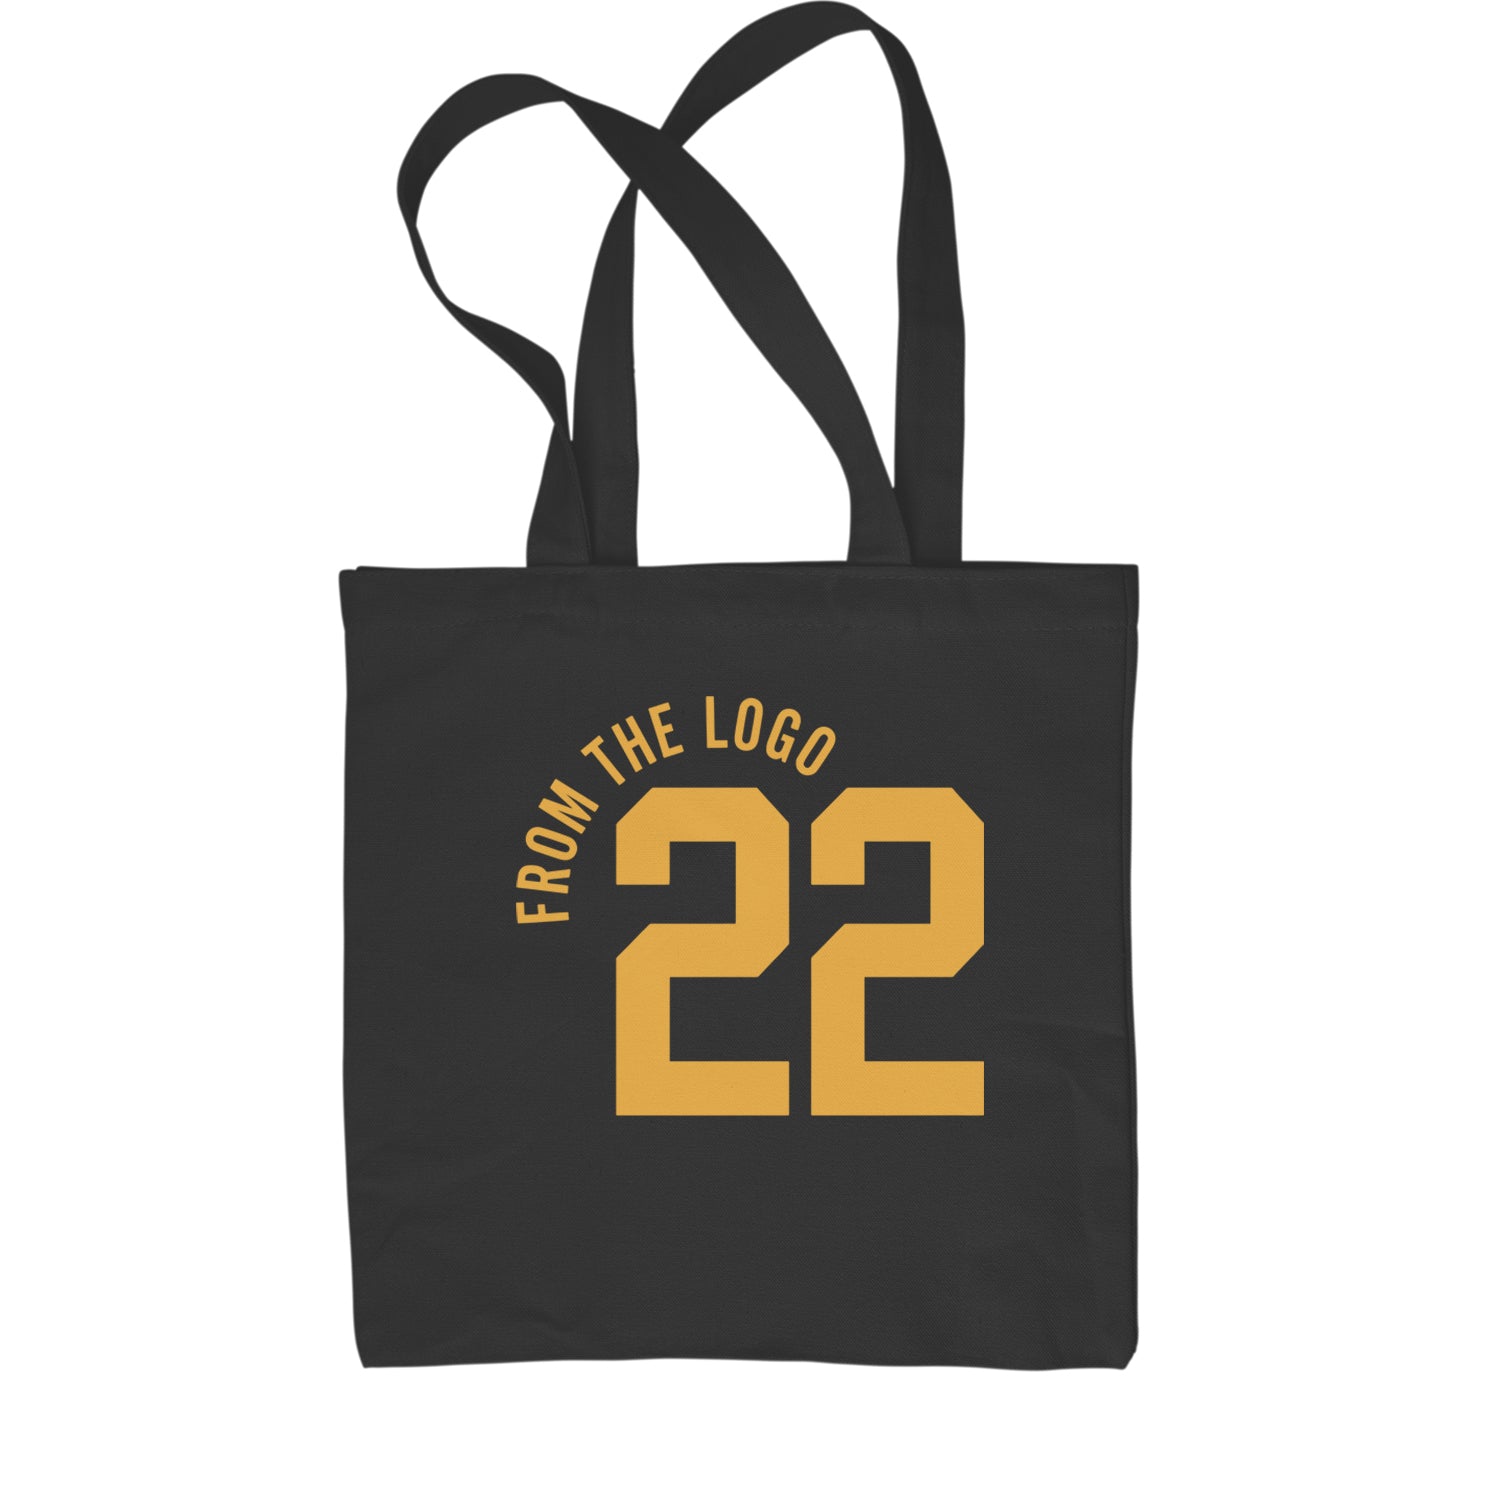 From The Logo #22 Basketball Shopping Tote Bag